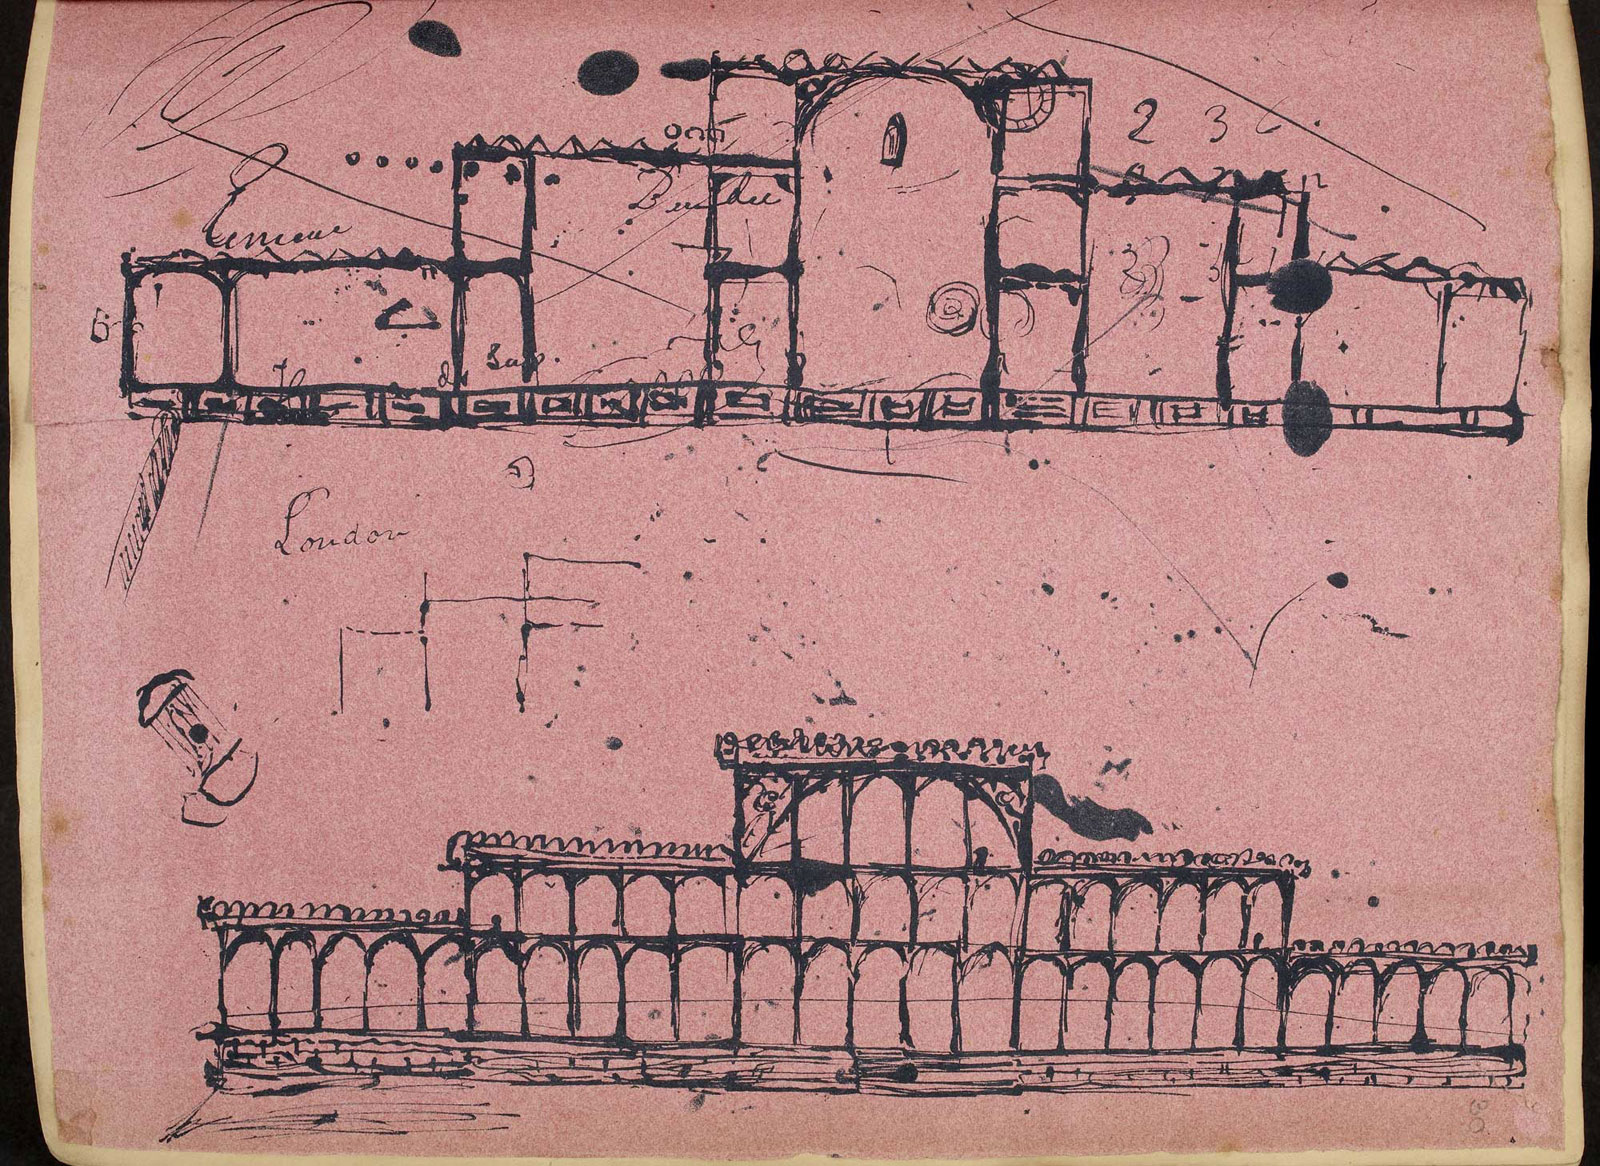 Facsimile of Paxton’s Crystal Palace design, 1851. Courtesy of the British Library